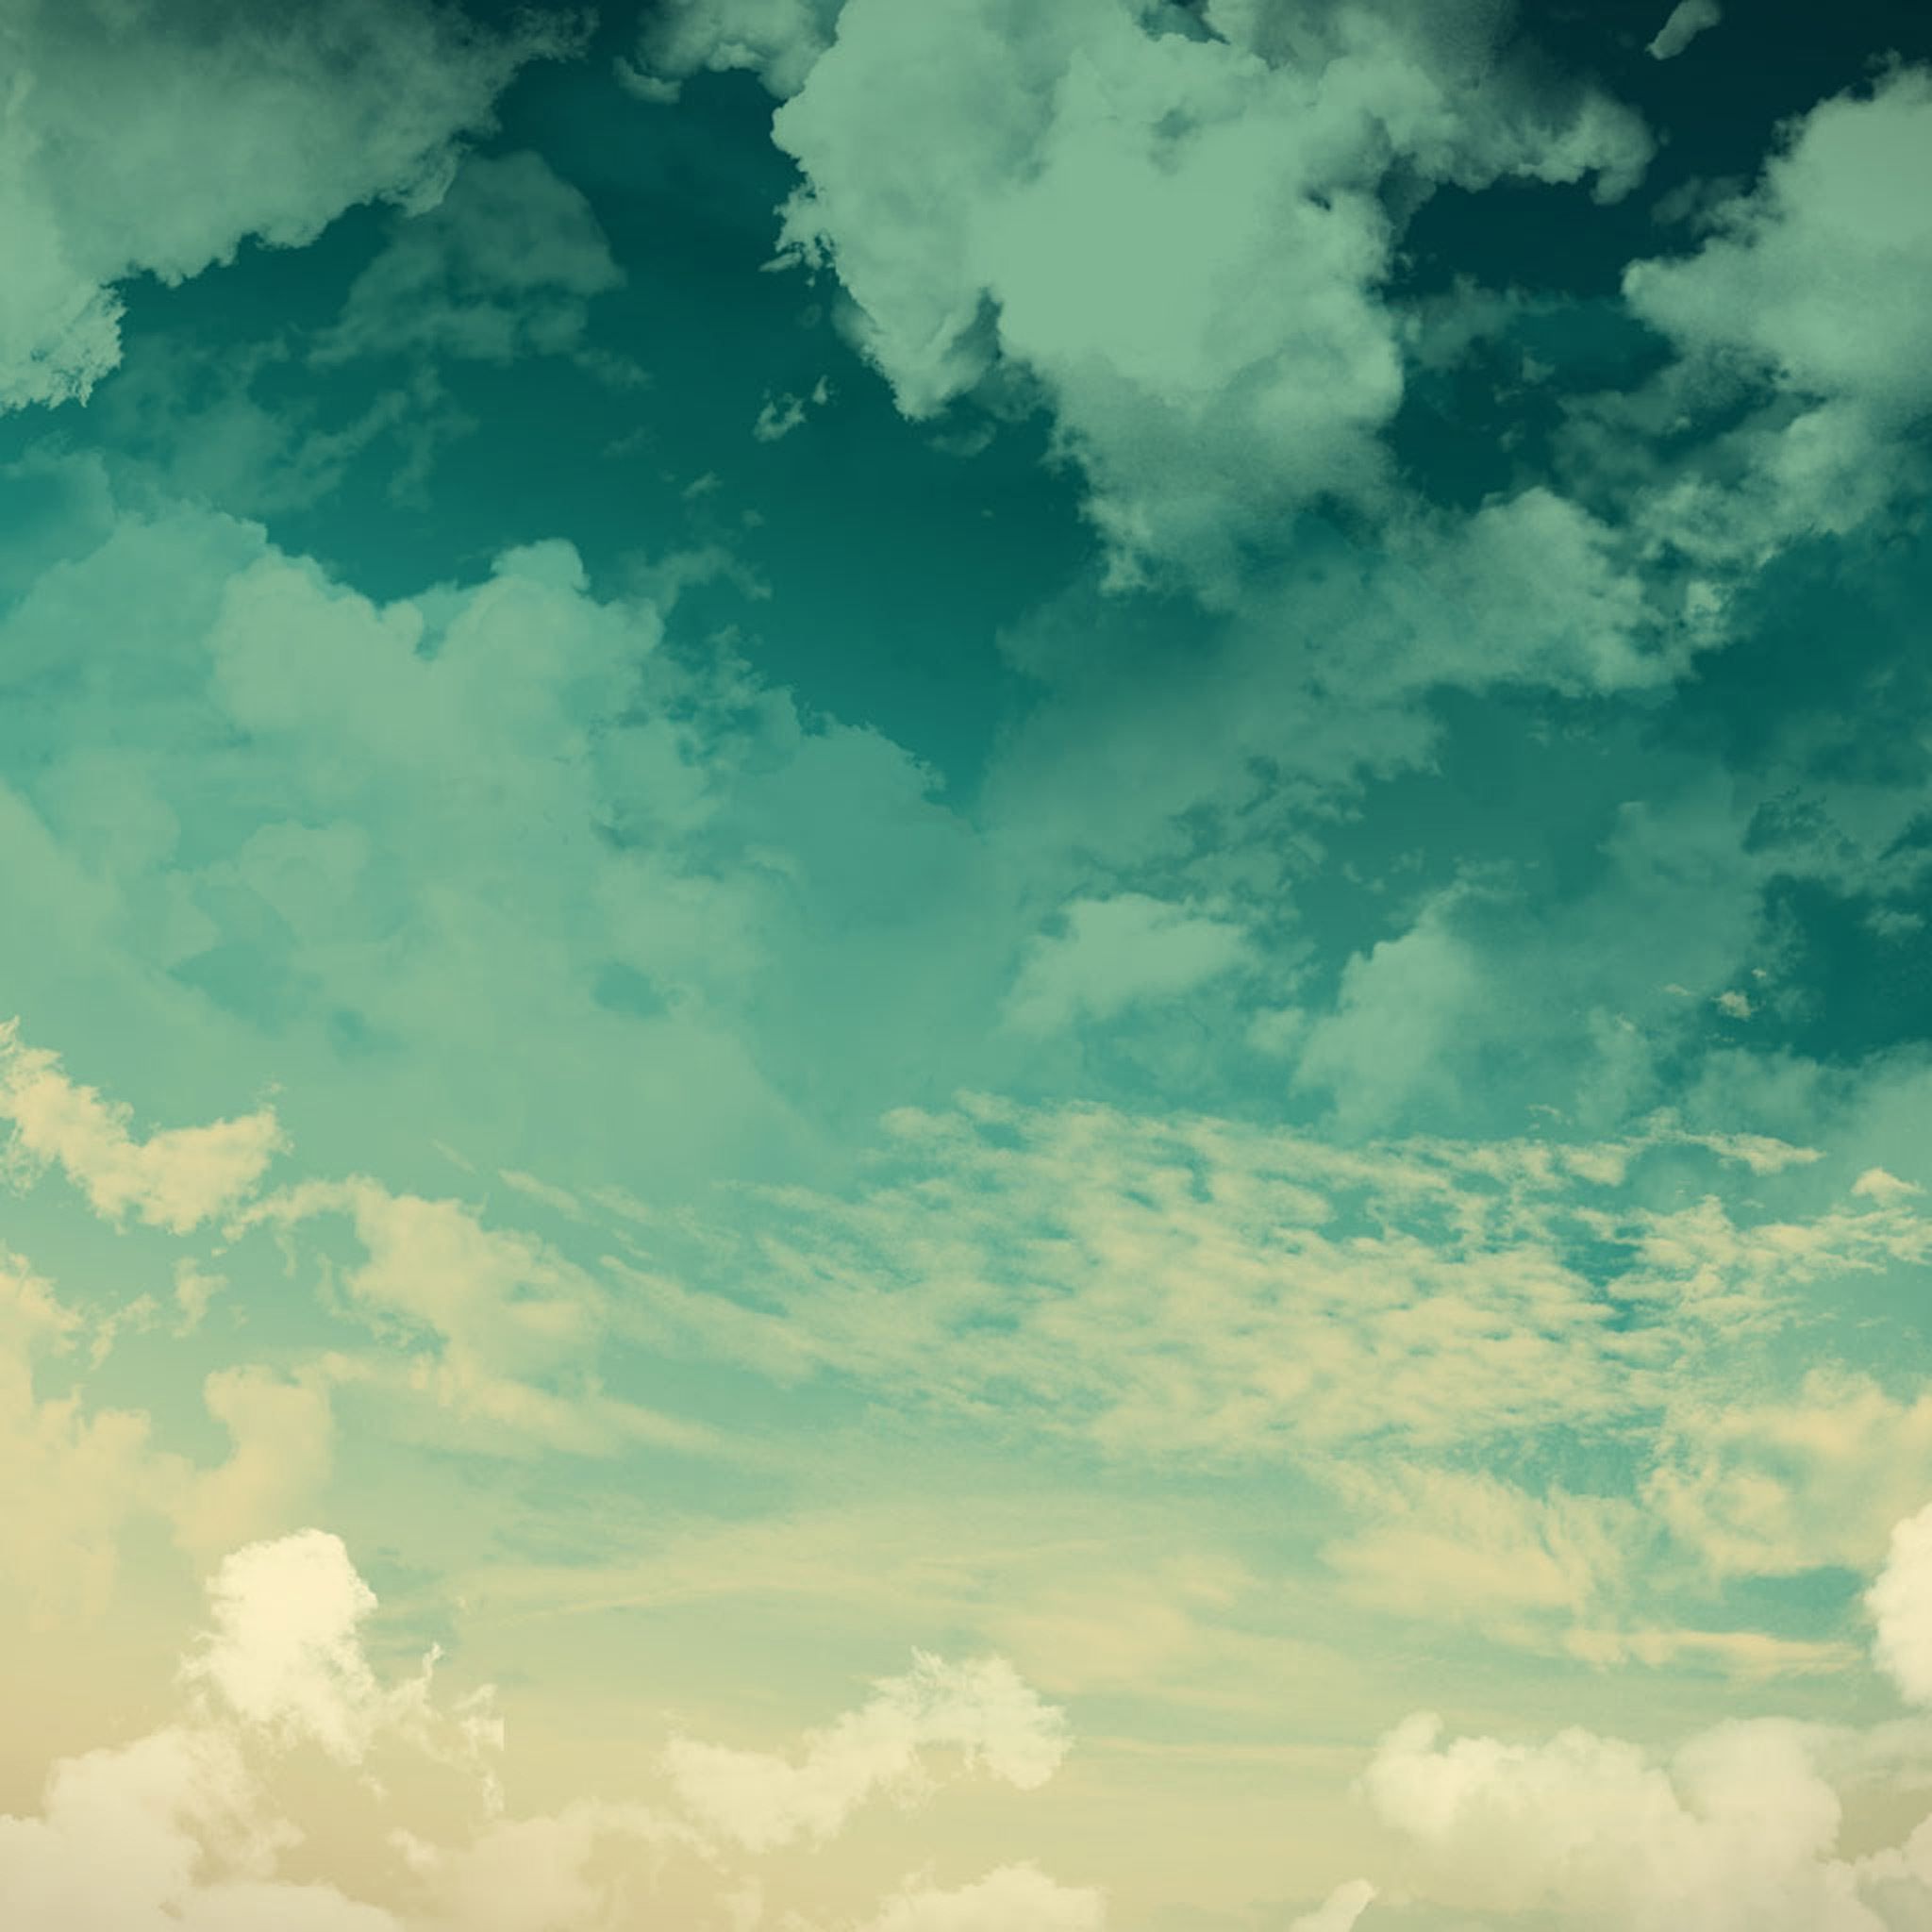 A blue and green gradient image of a cloudy sky - Mint green